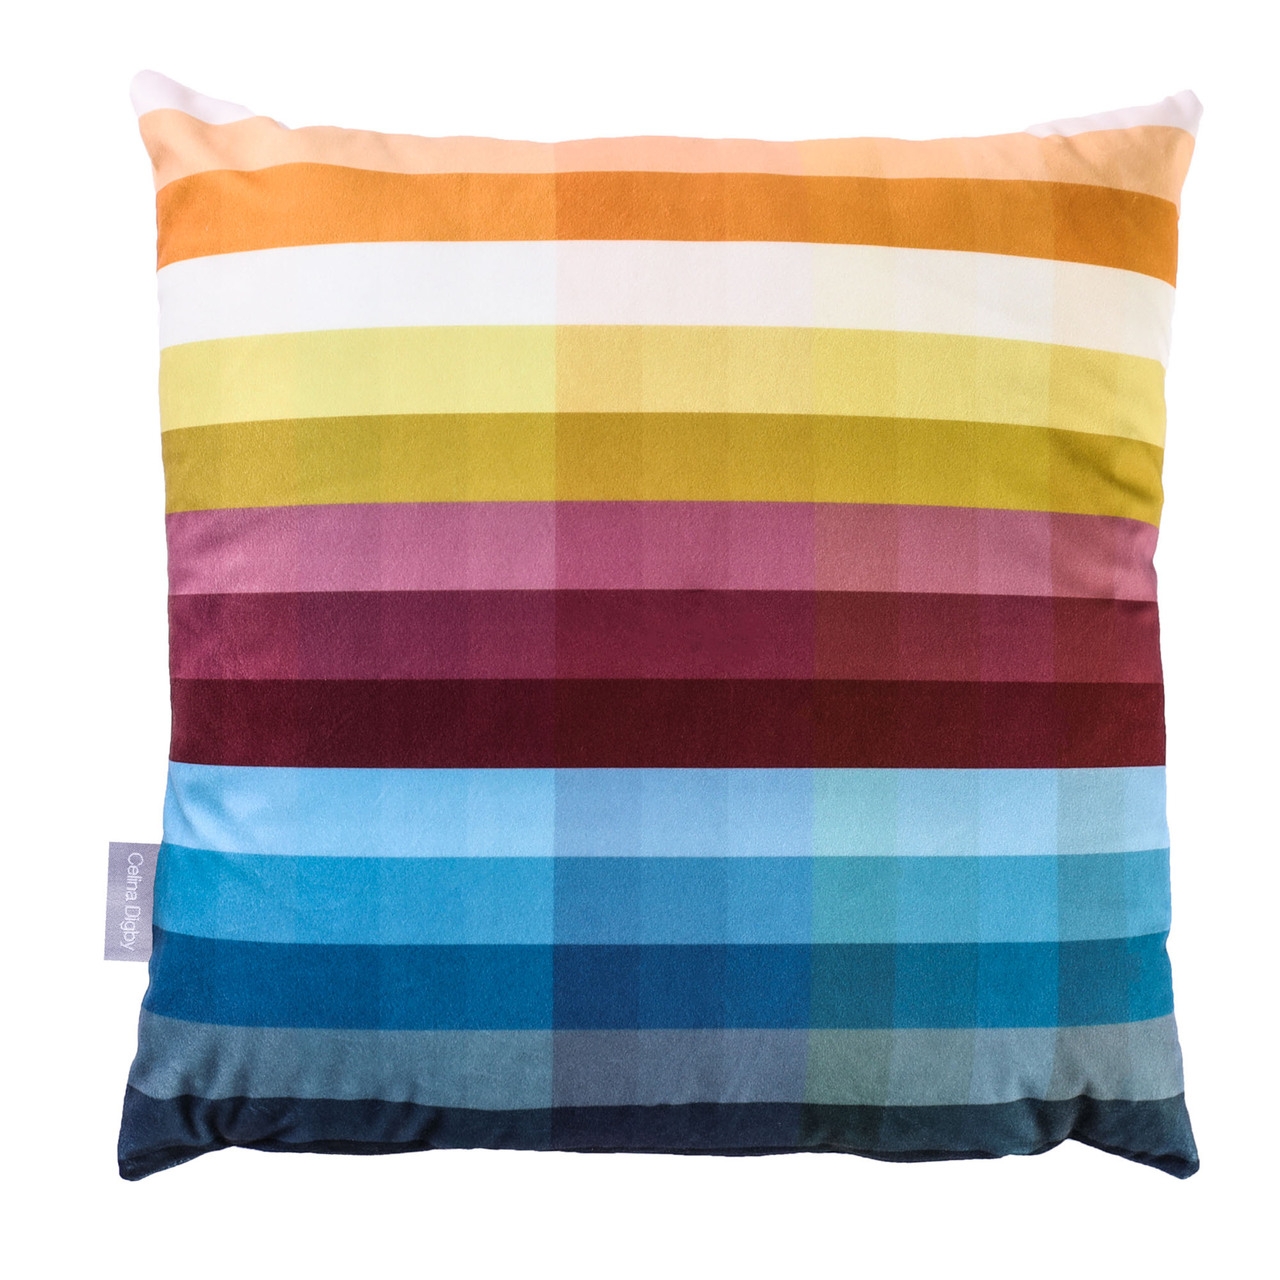 Celina Digby Luxury Opulent Velvet Cushion – Pixel Stripes Available in 2 Sizes Standard (45cm x 45cm) Feather Filling